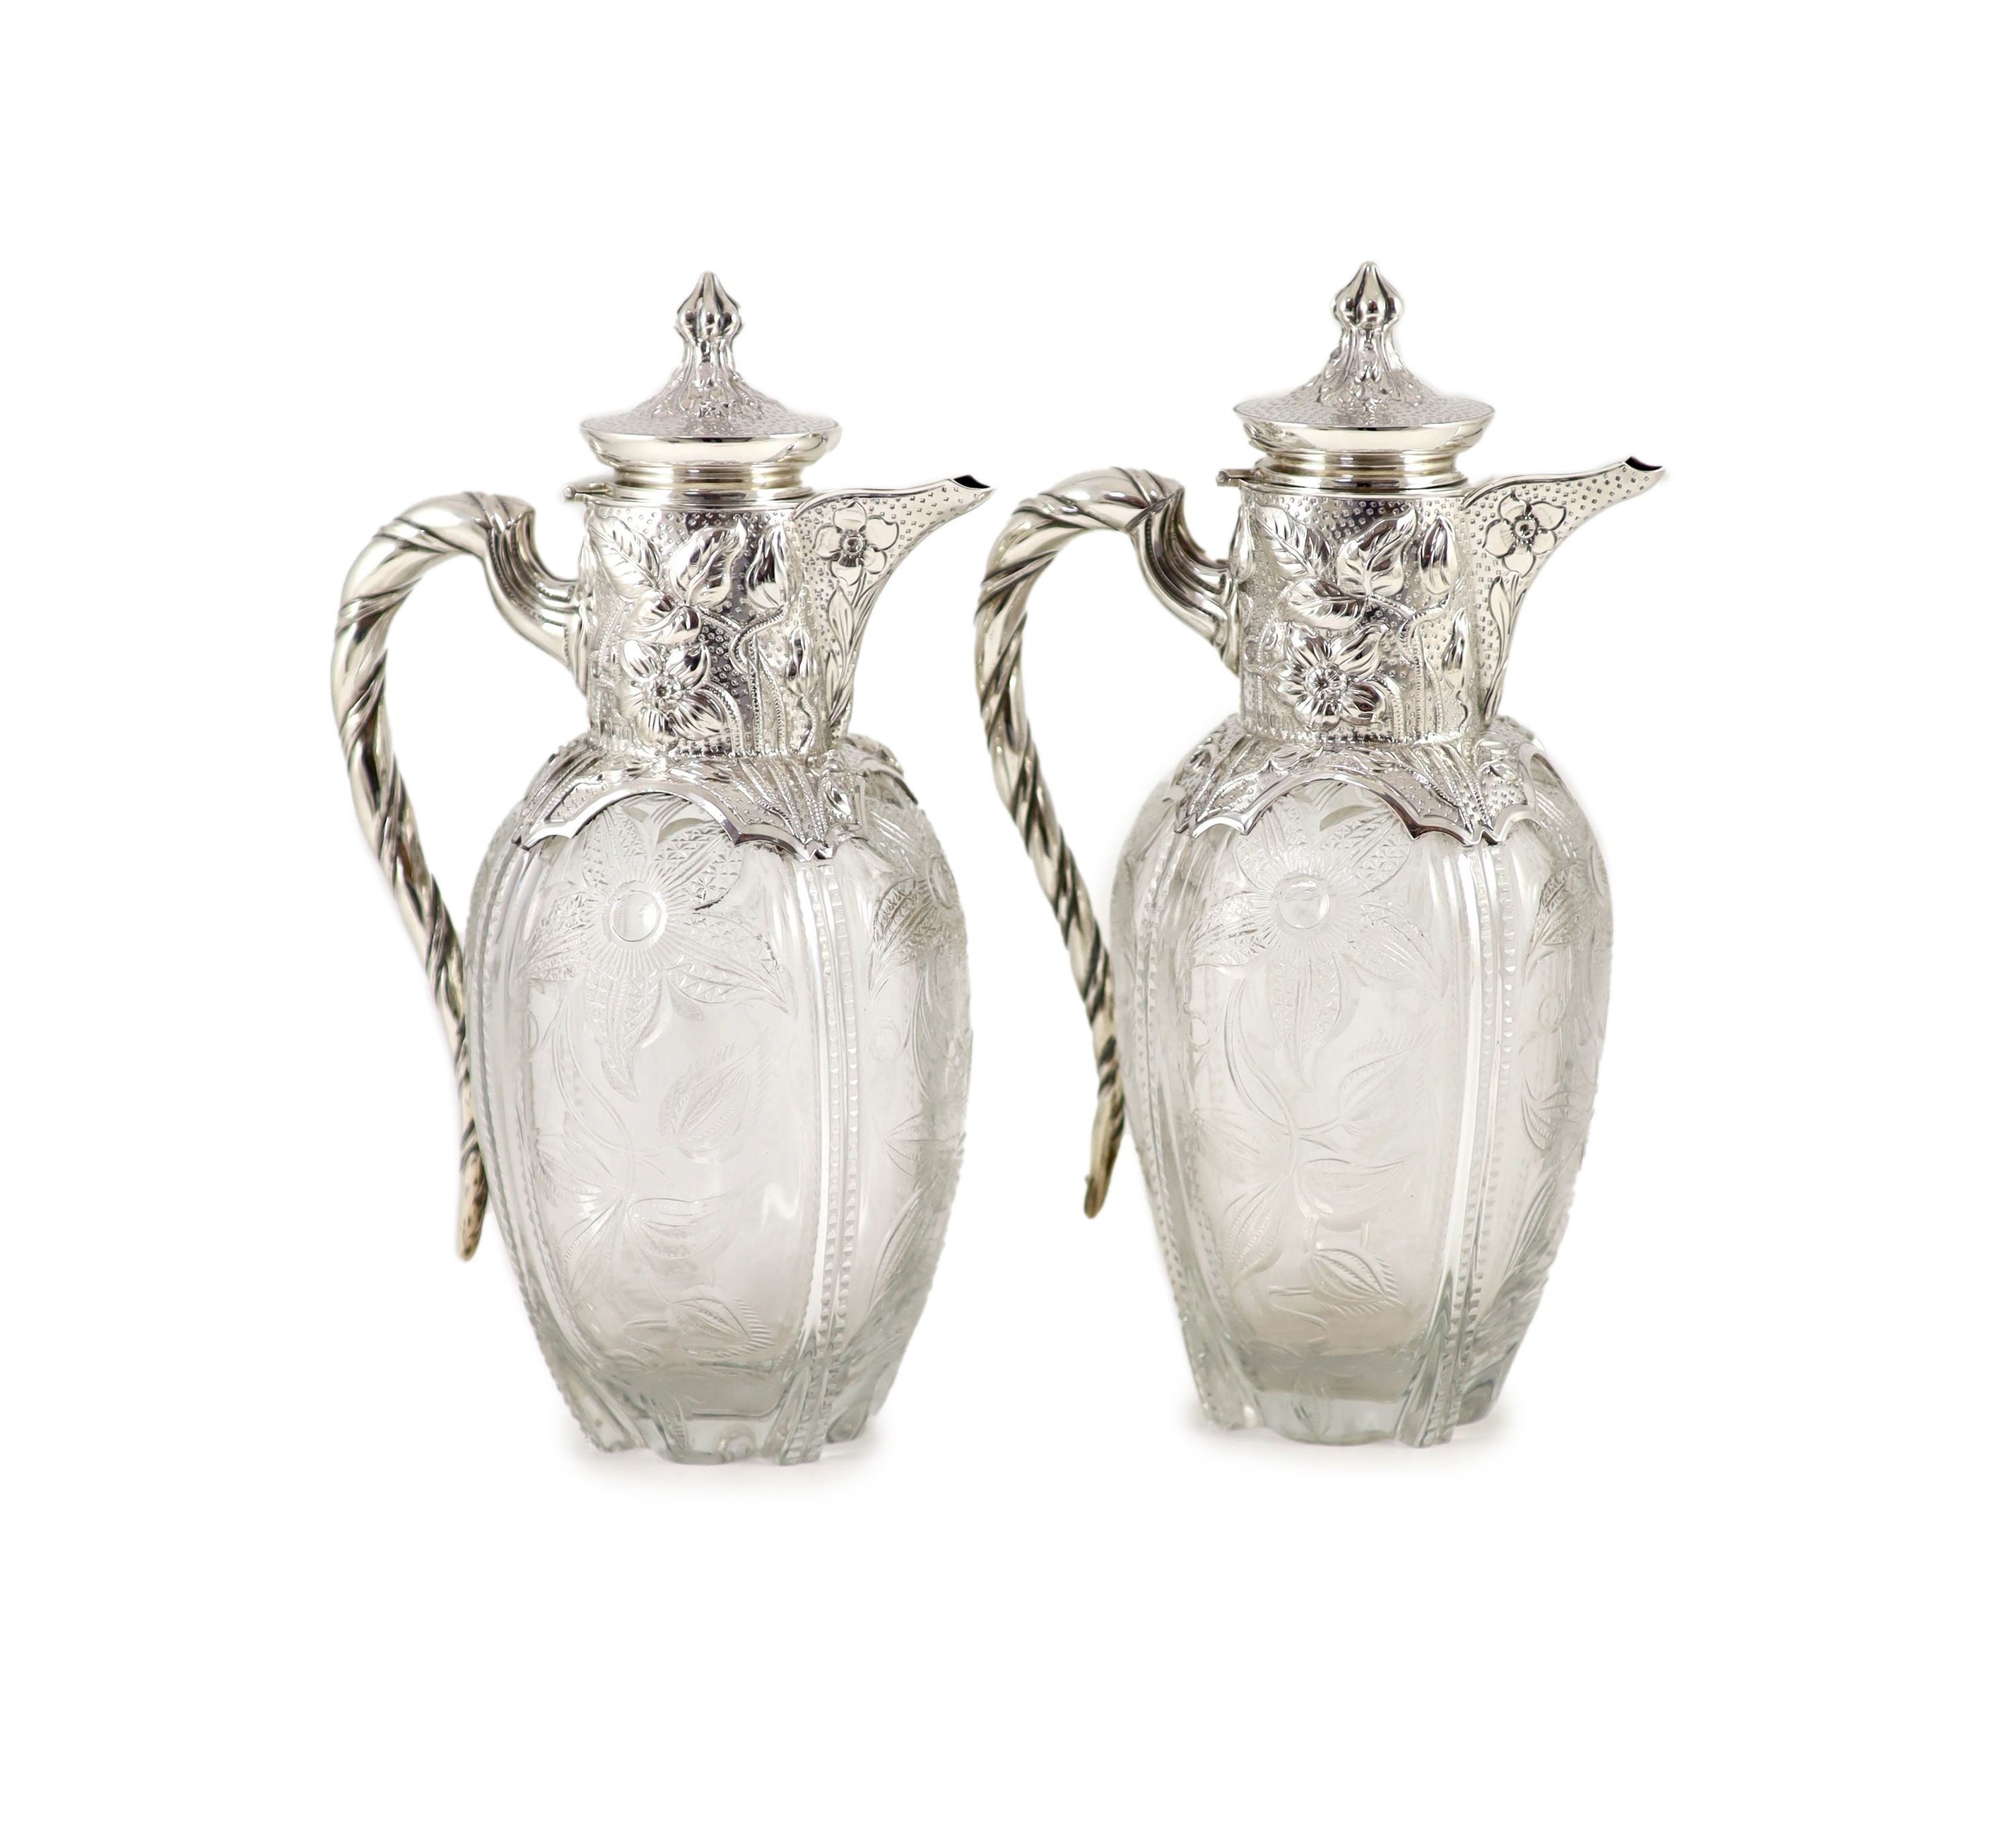 A good pair of late Victorian silver mounted ‘rock crystal’ glass claret jugs, with hinged covers, by John Grinsell & Sons                                                                                                  